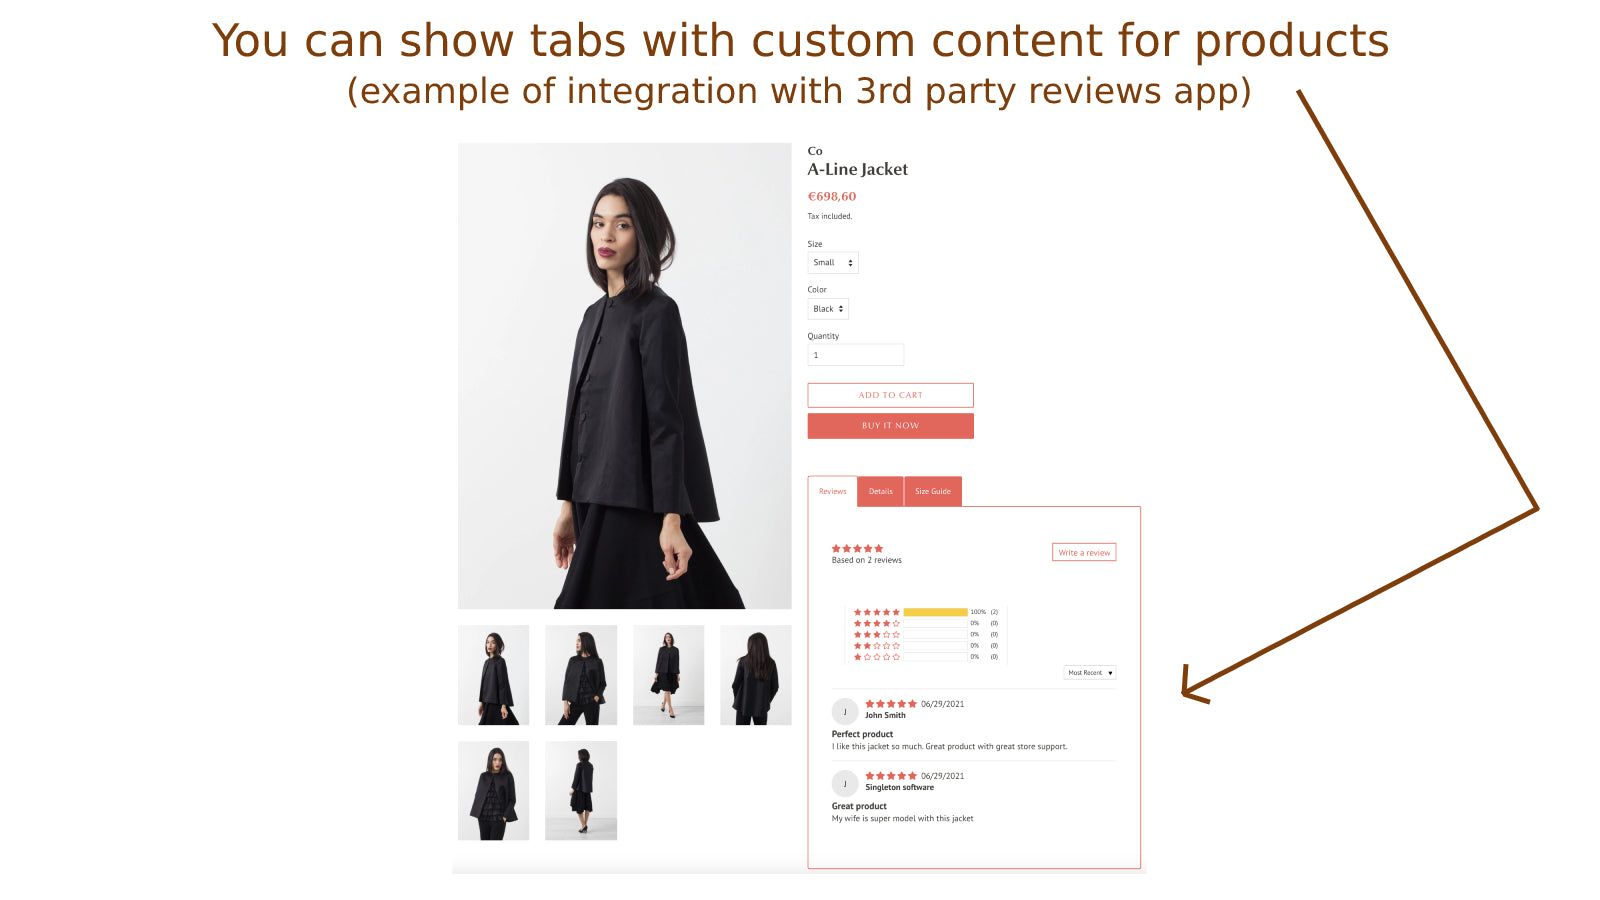 You can show tabs with custom content for products